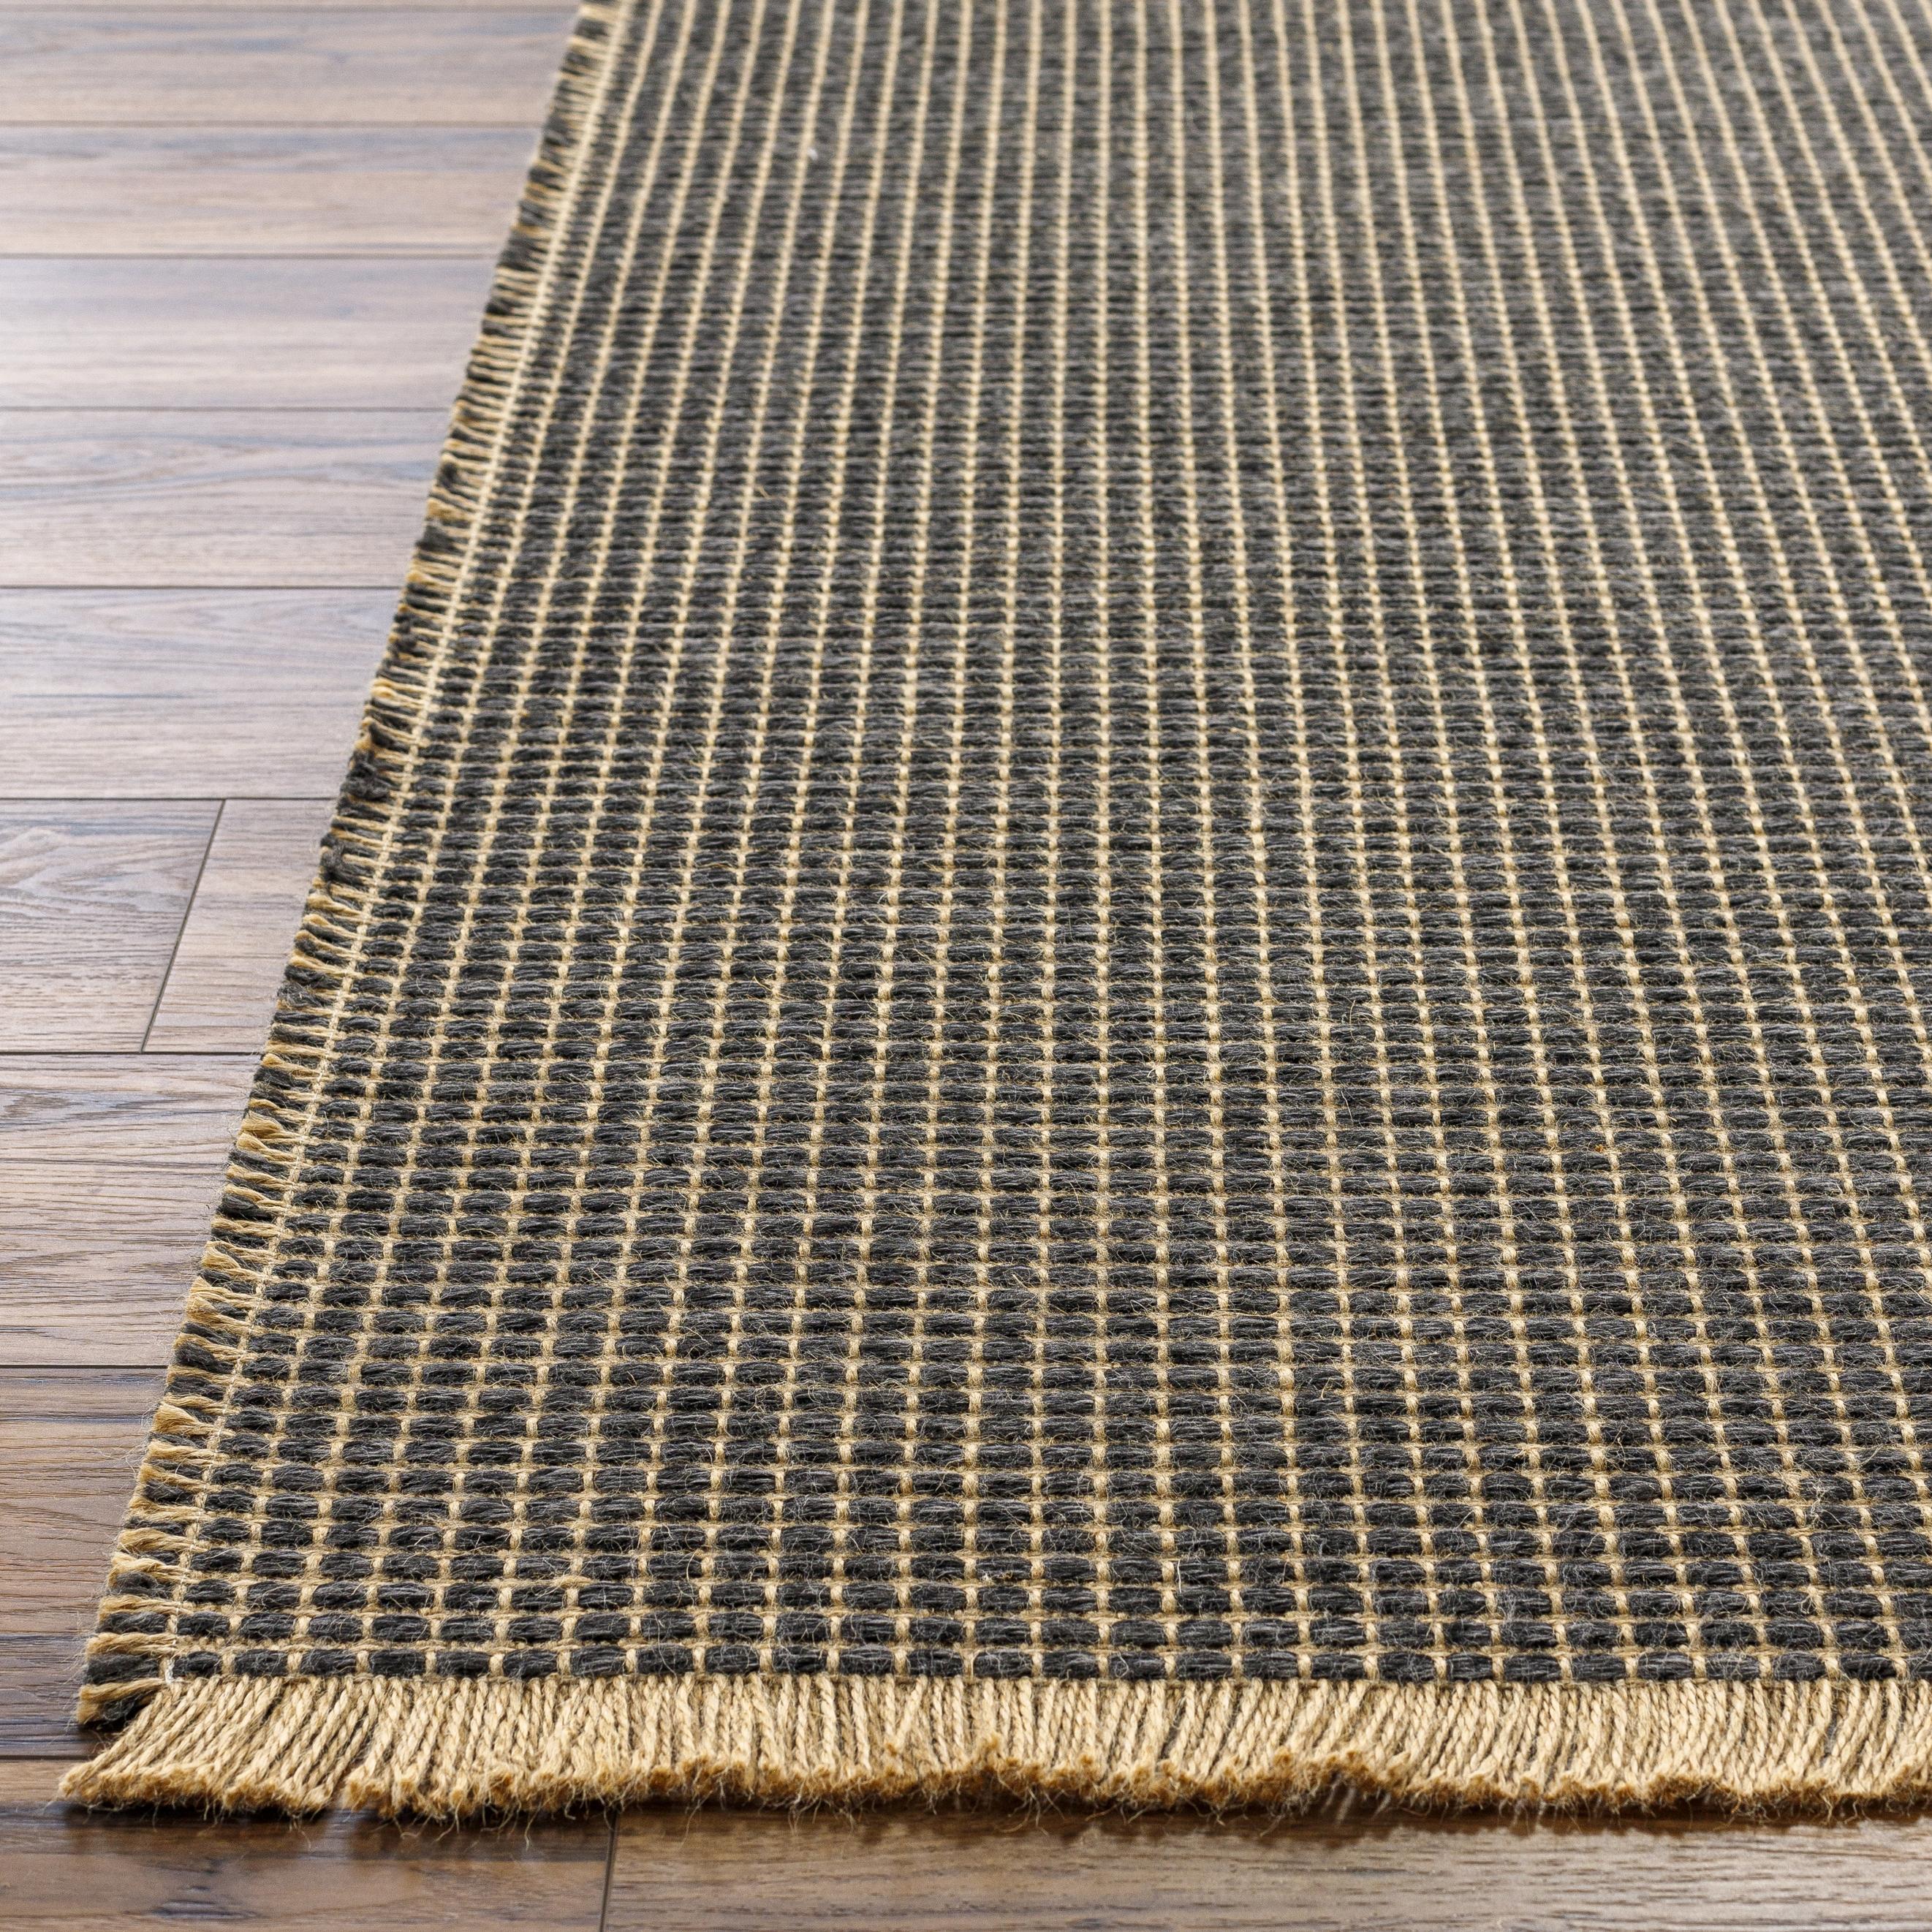 This beautiful Kimi area rug is the perfect addition to any room in your home. The special collaboration between Surya and Becki Owens has created a unique, eye-catching design that will bring texture and style to your space. The rug is made from polypropylene and jute, creating a textural woven pattern in natural tones with dark contrast. Amethyst Home provides interior design, new home construction design consulting, vintage area rugs, and lighting in the Miami metro area.